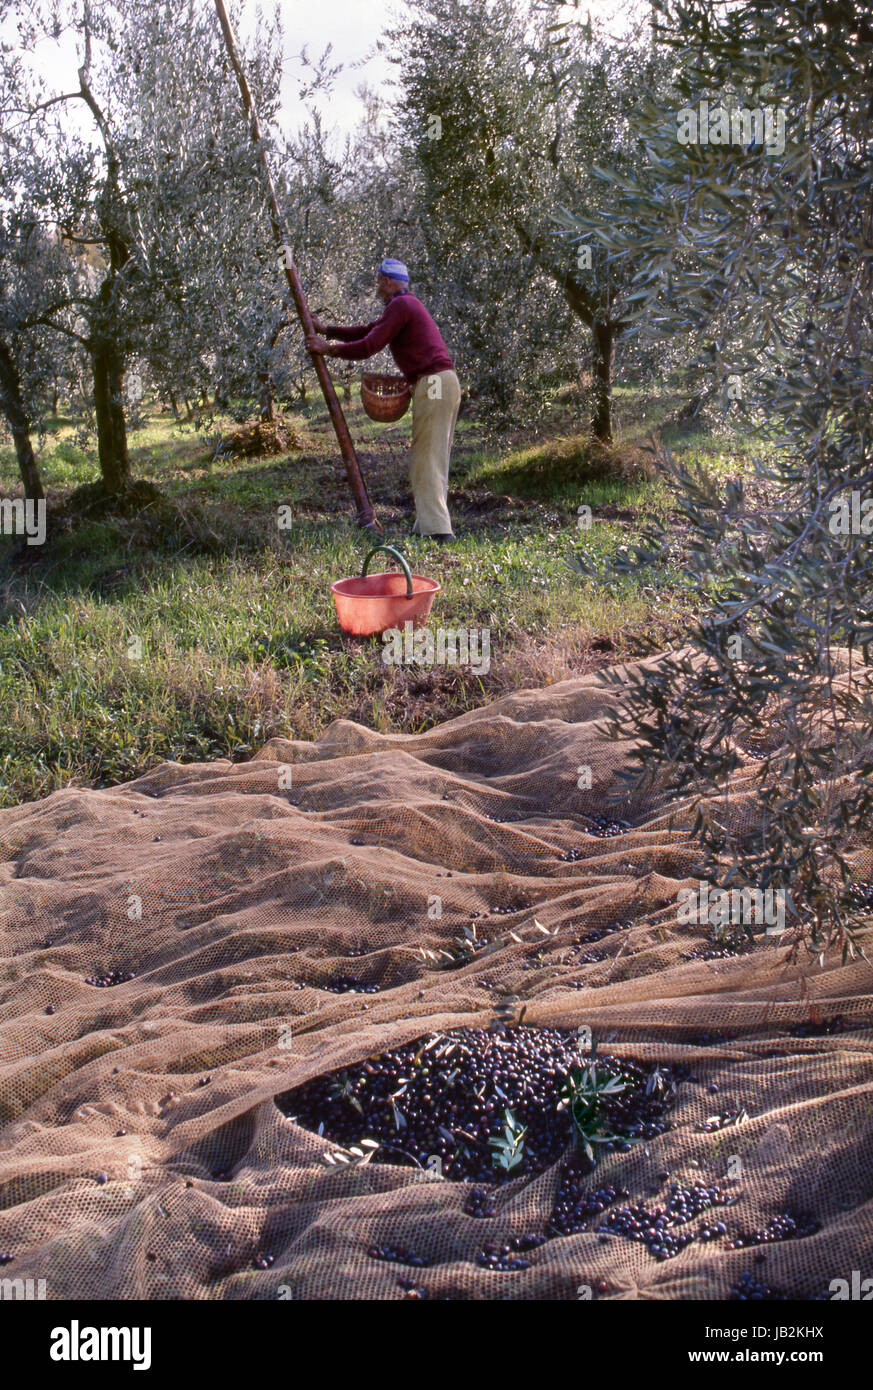 OLIVE GROVE TUSCANY HARVEST RUSTIC Italian man in olive grove in late afternoon sun, using traditional techniques to harvest olives, Tuscany, Italy. Stock Photo